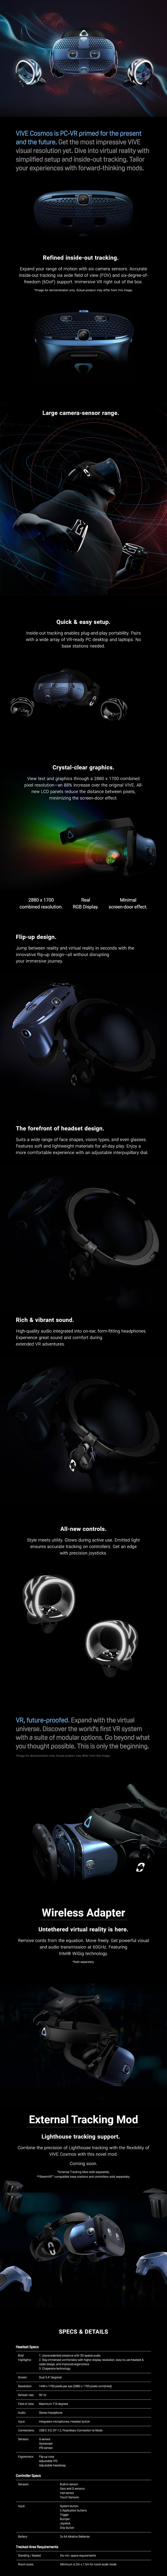 A large marketing image providing additional information about the product HTC VIVE Cosmos VR Headset Kit - Additional alt info not provided